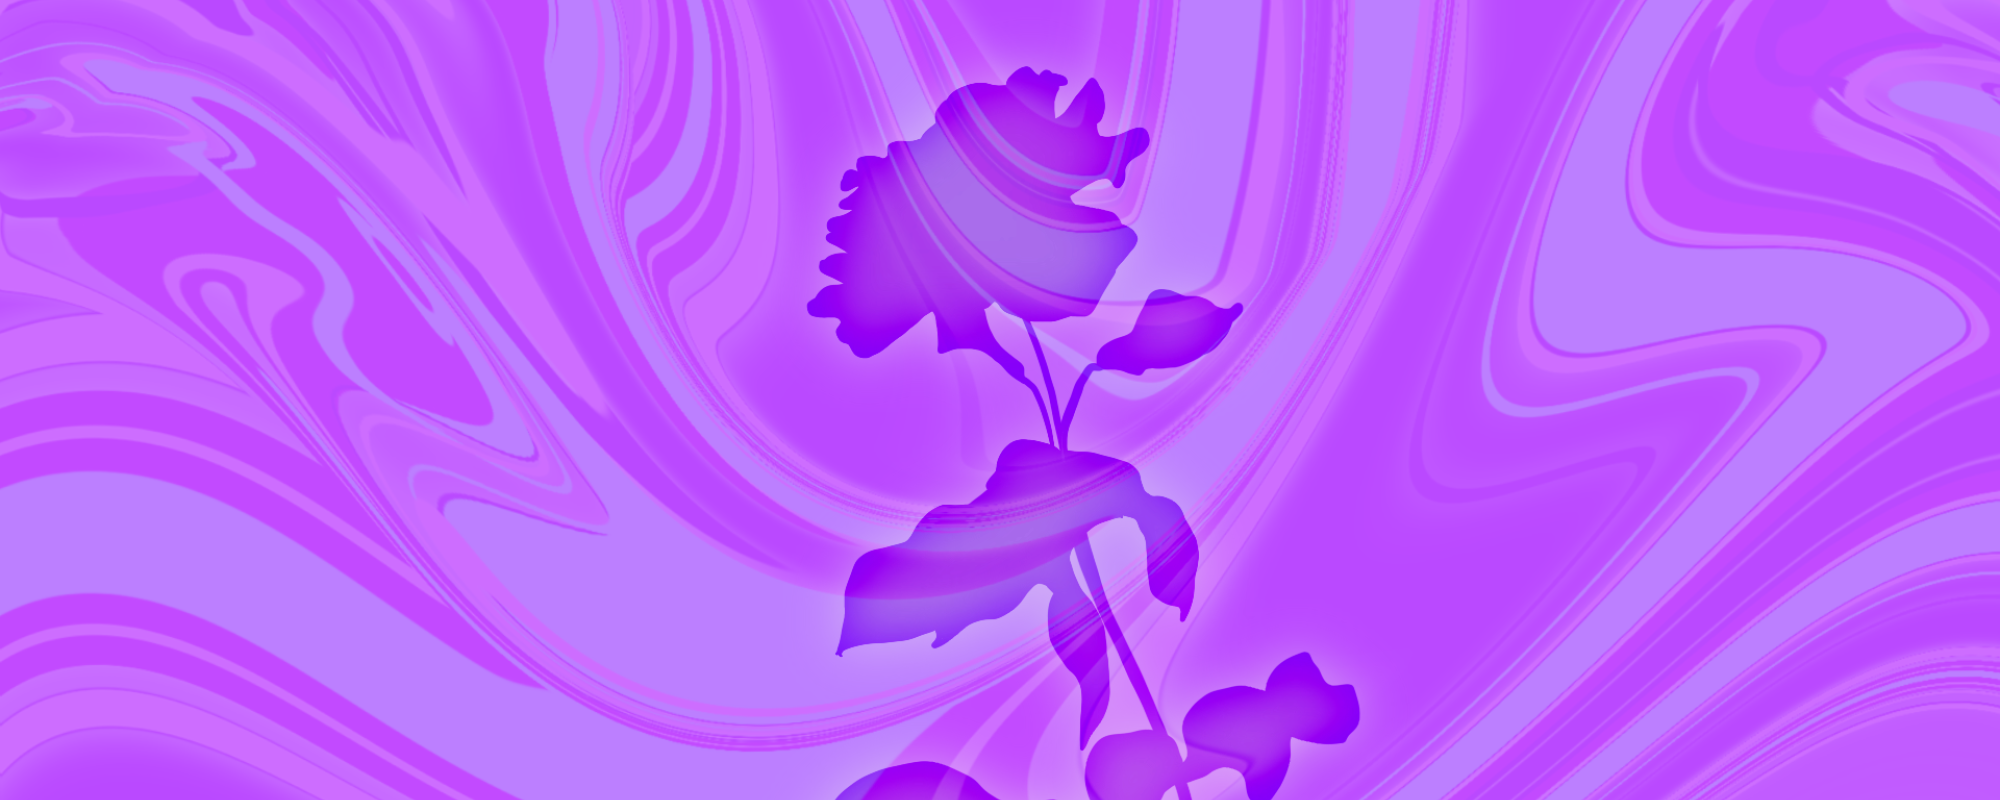 image of a rose